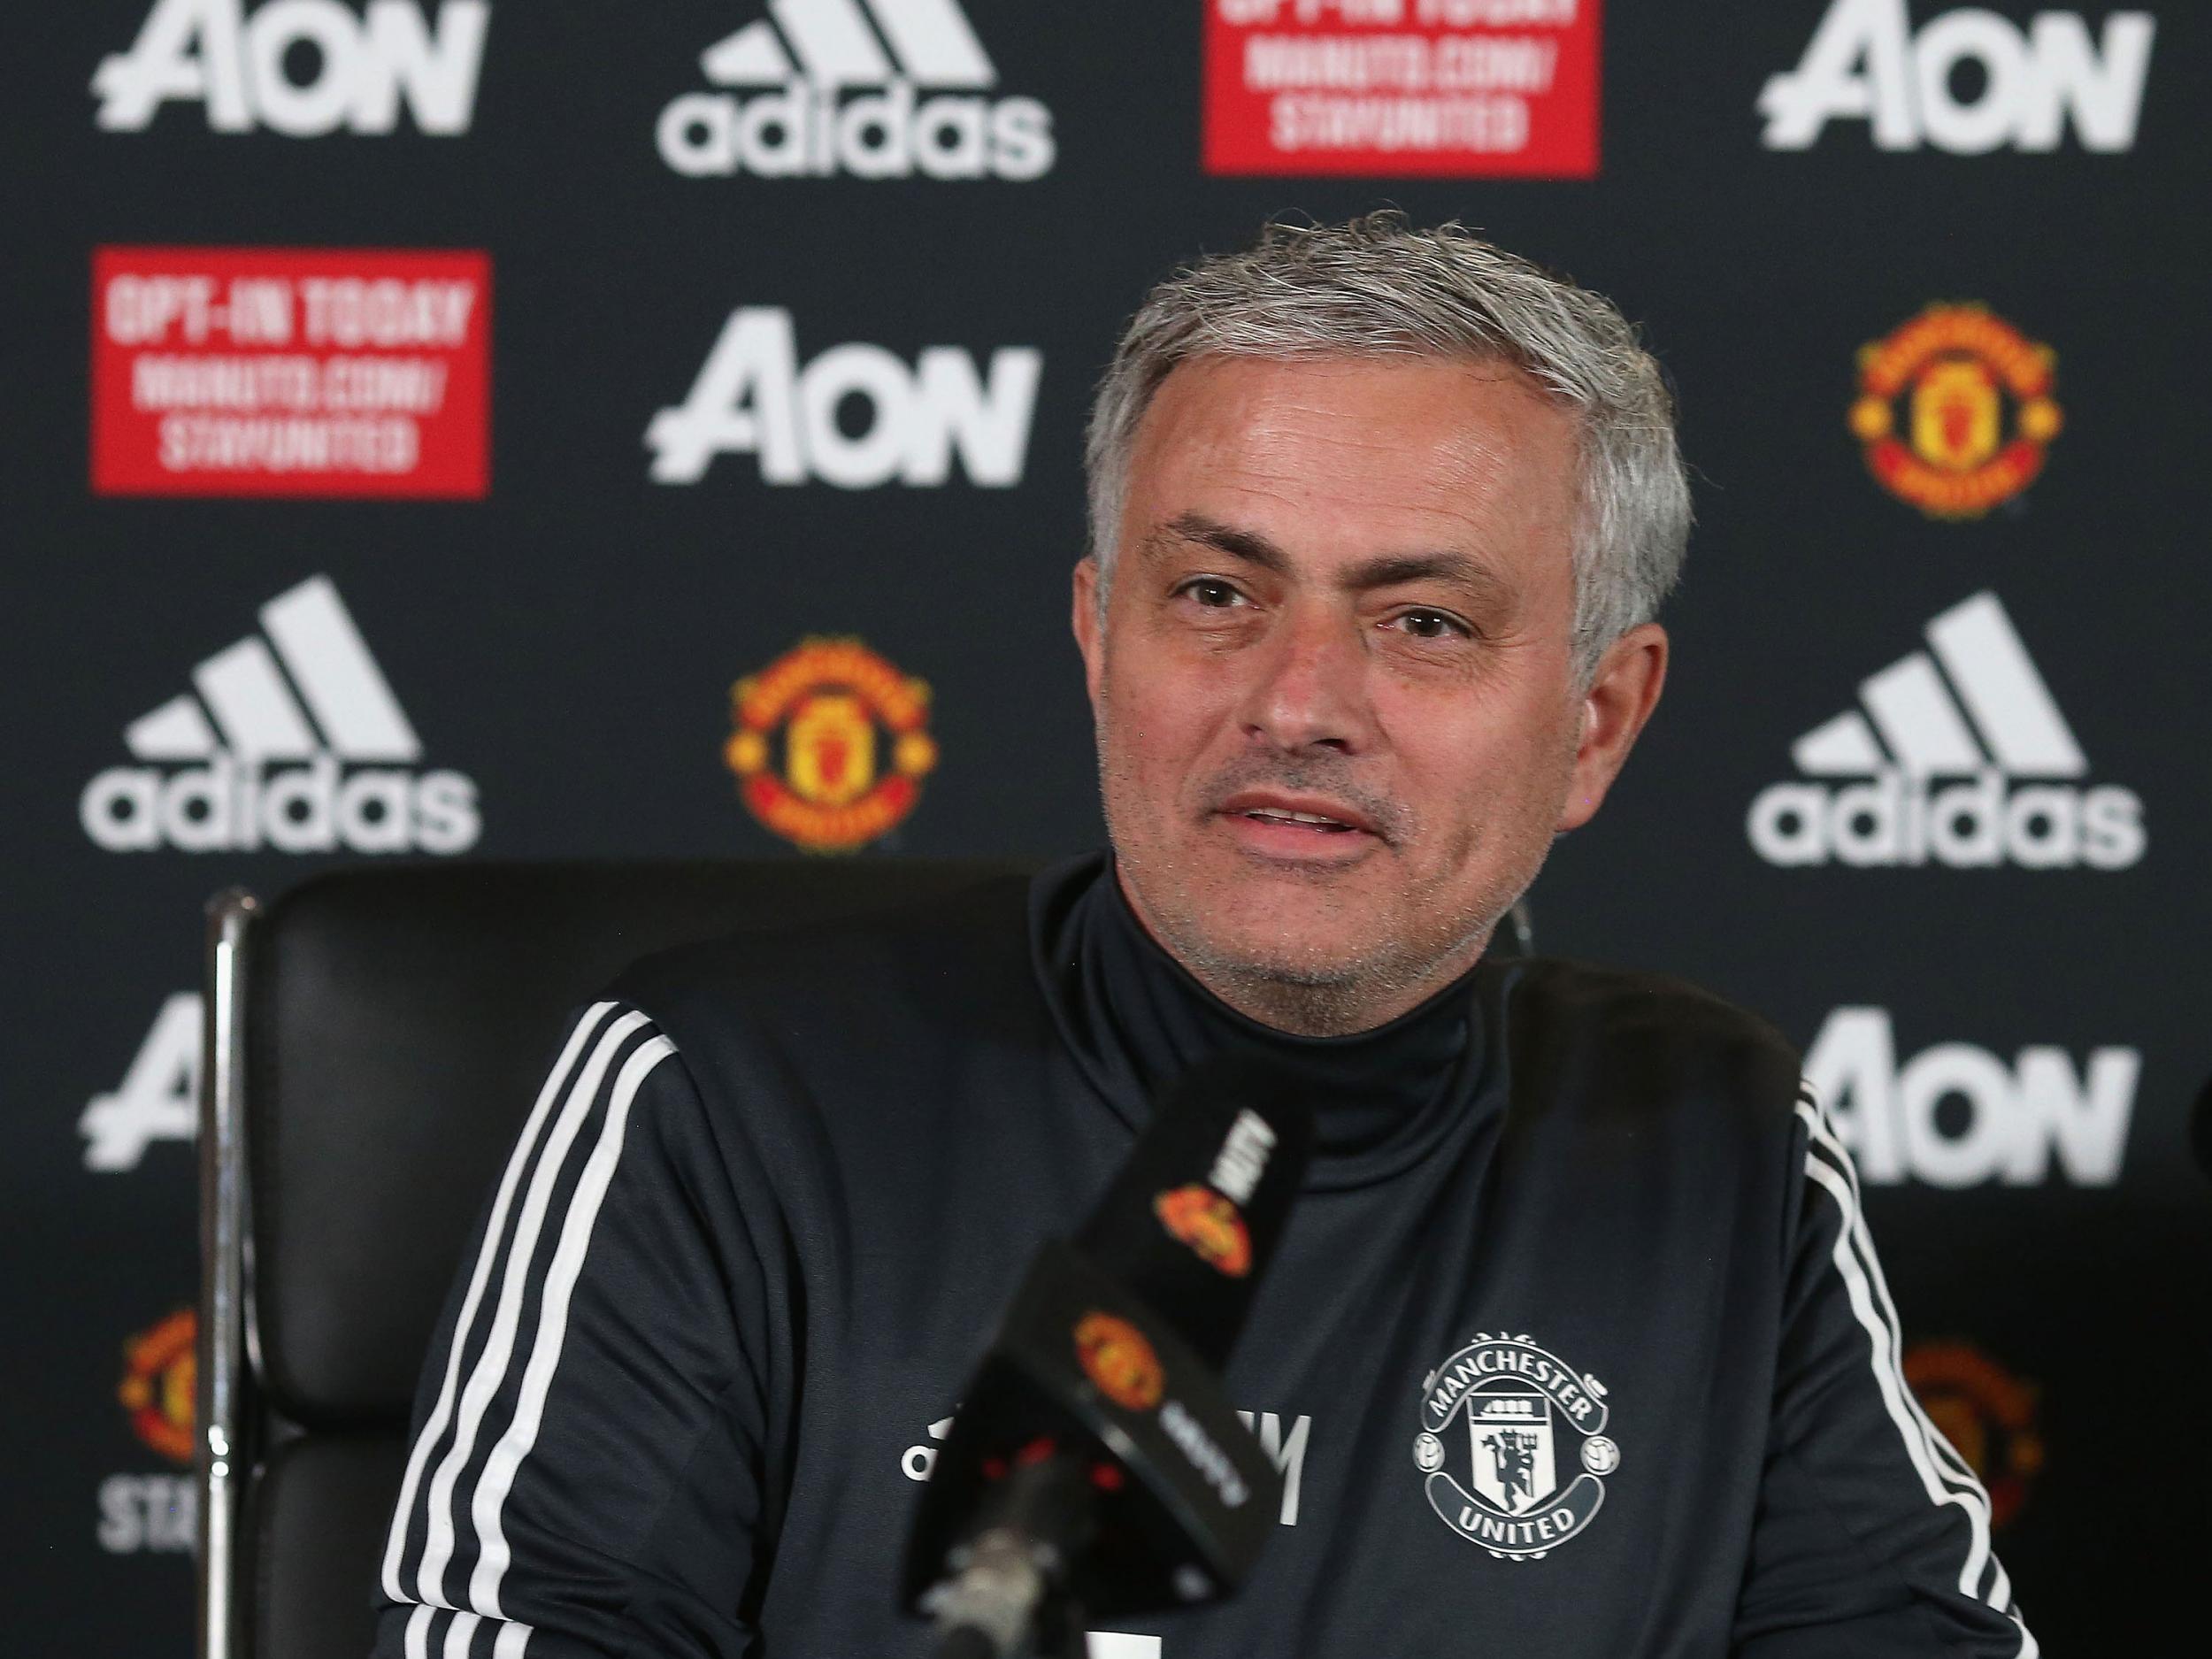 Jose Mourinho was in a truculent mood at his press conference on Friday